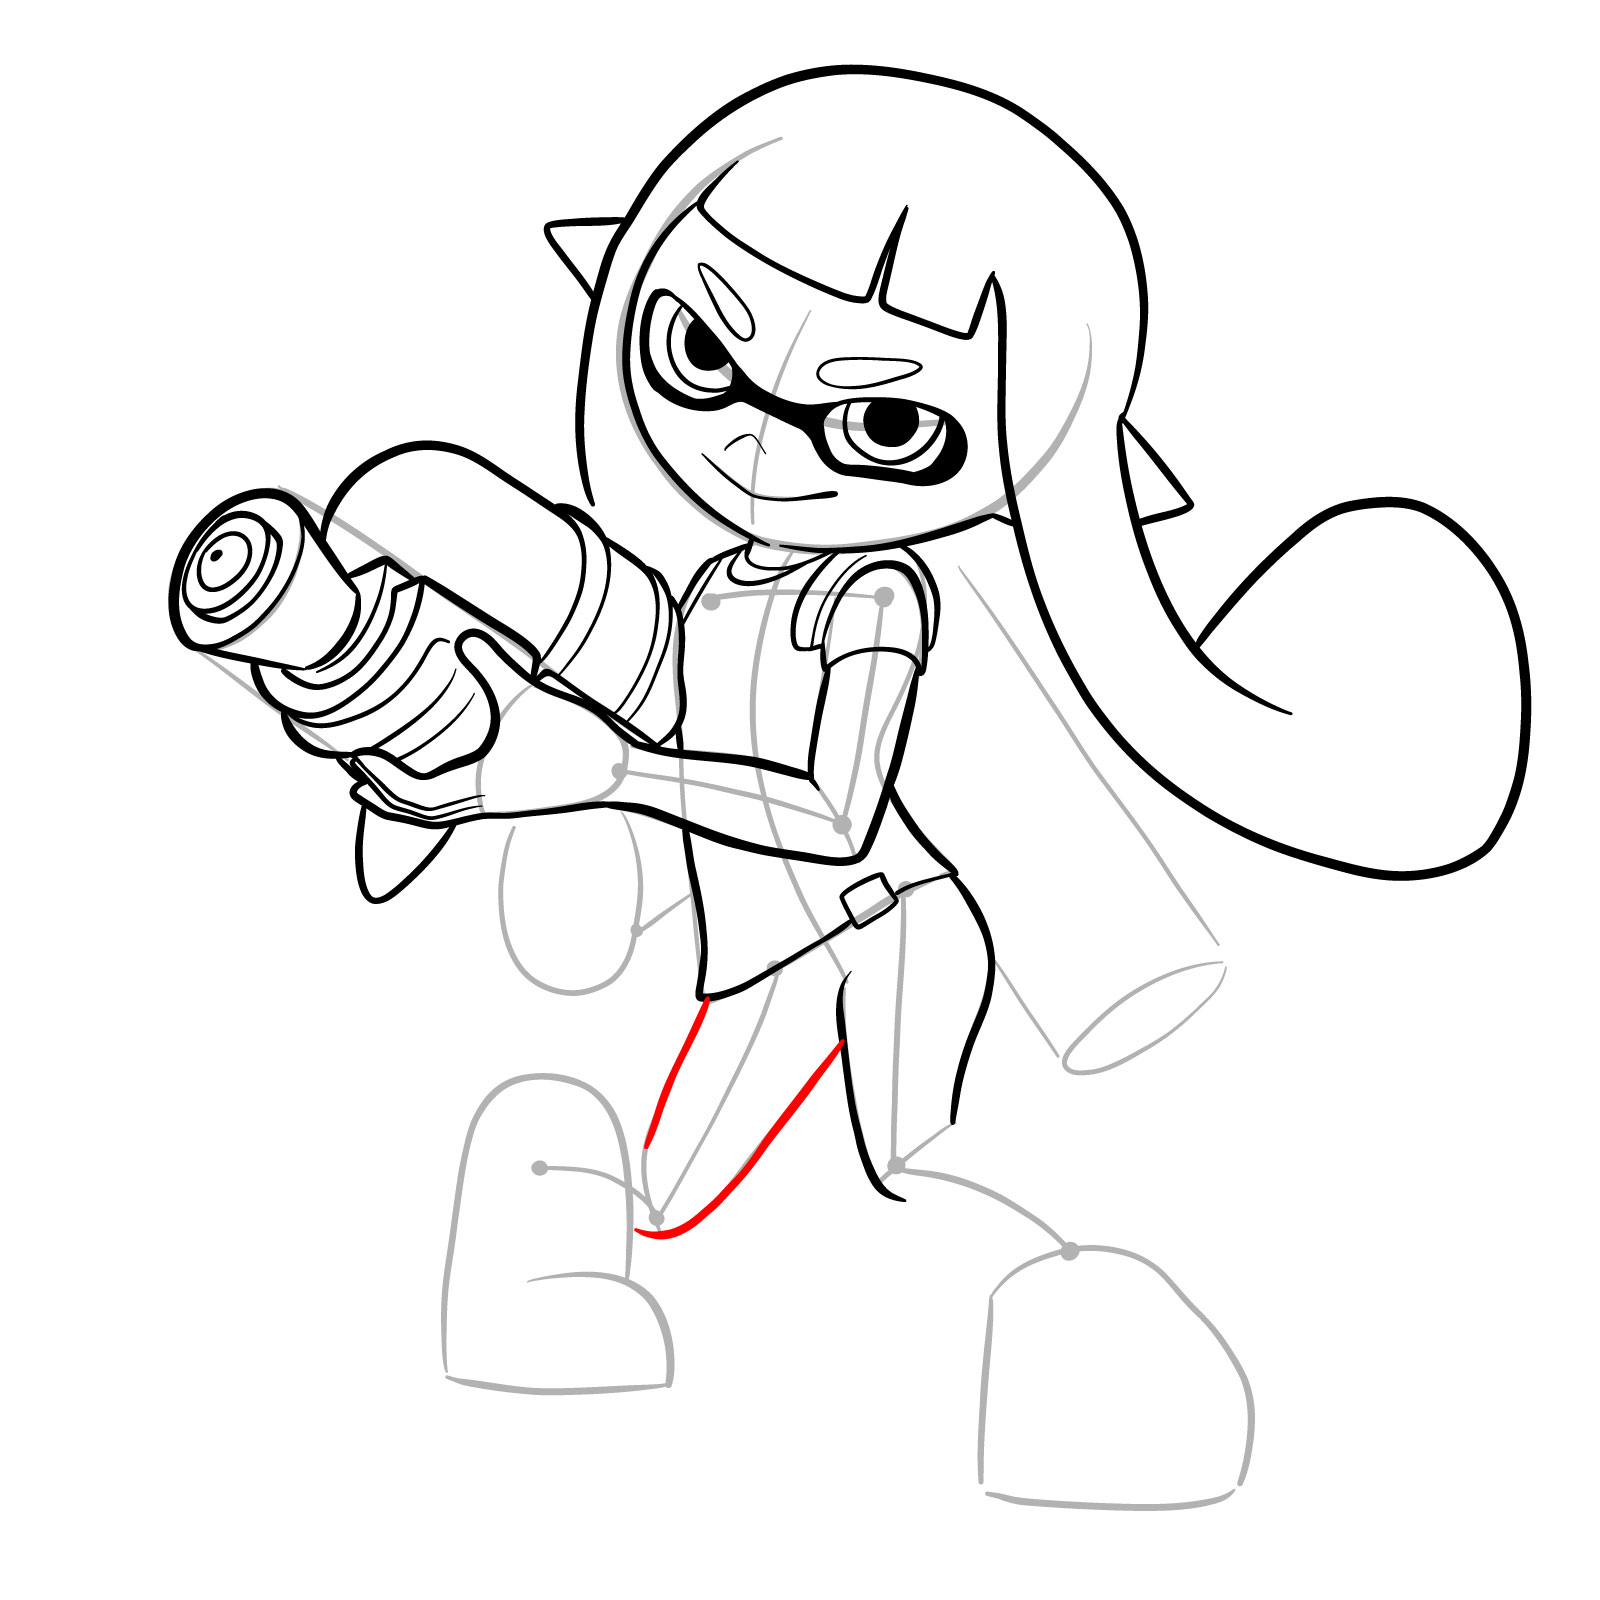 How to draw an Inkling Girl - step 22